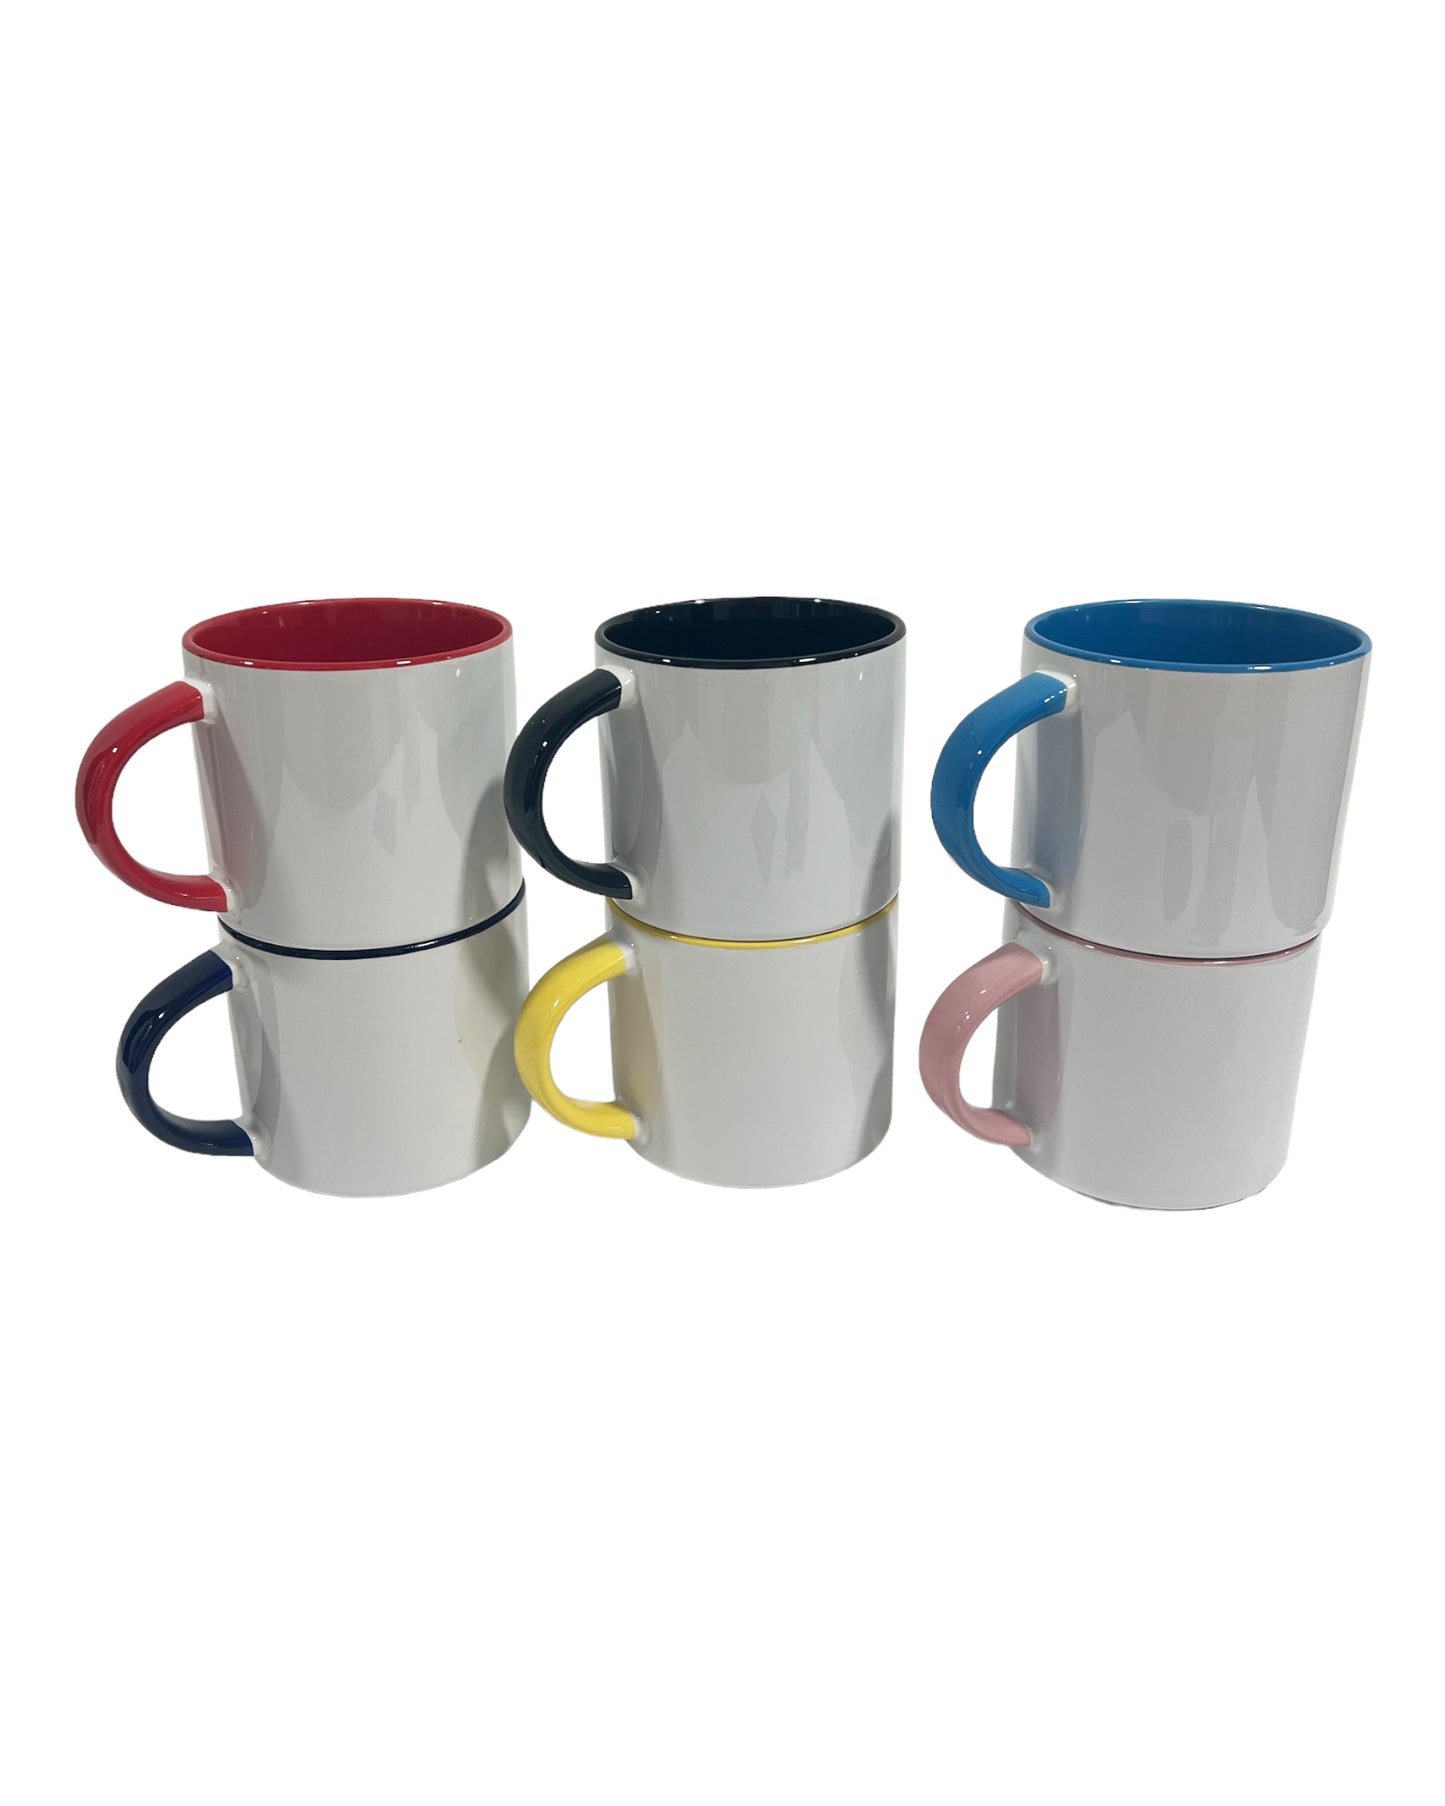 1 piece stacking cup colored inside/handle (7 colors)